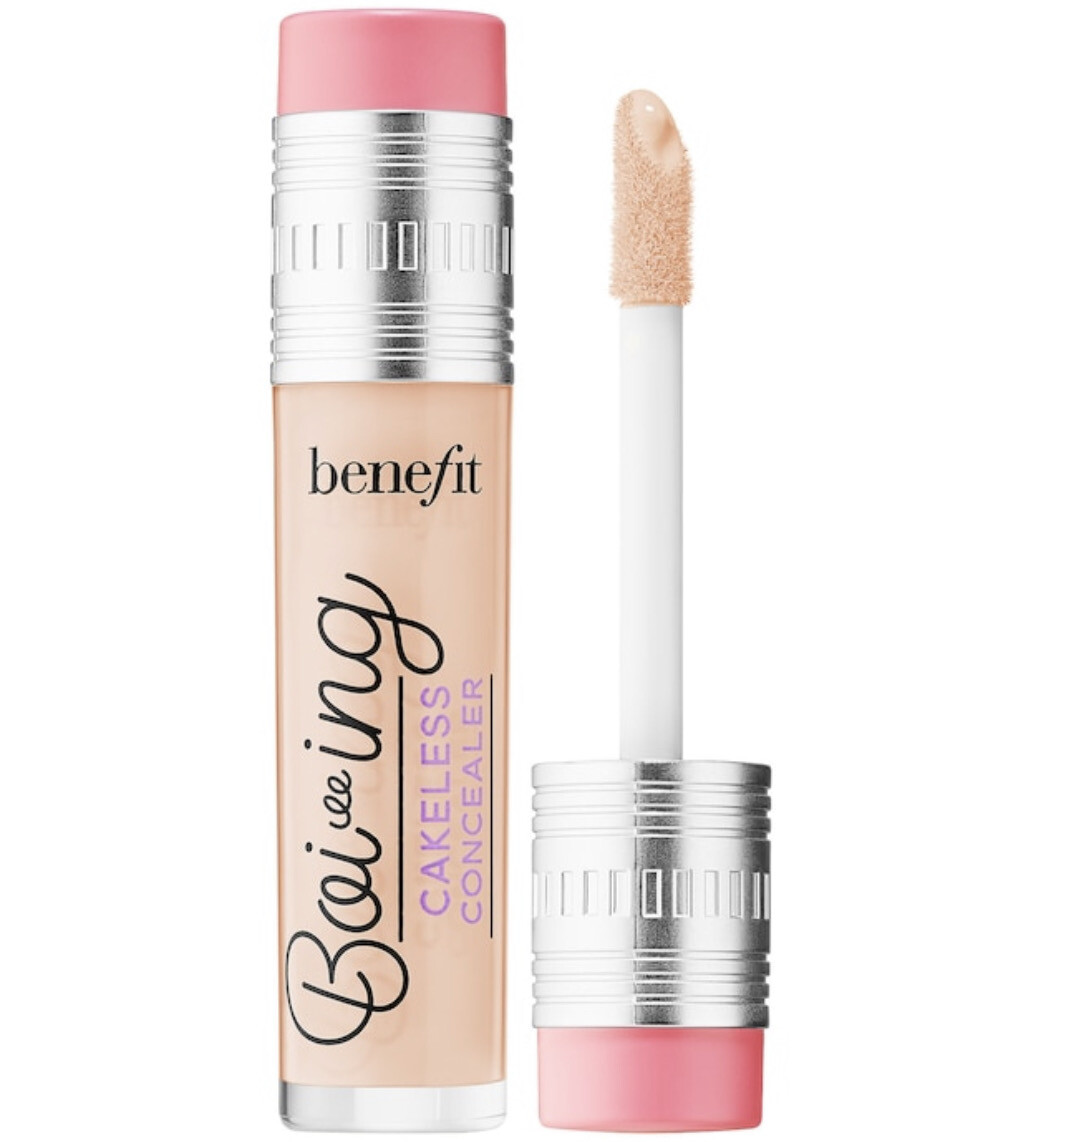 Benefit Cosmetics - Boi-ing Cakeless Full Coverage Waterproof Liquid Concealer | Shade 3 - Light Neutral